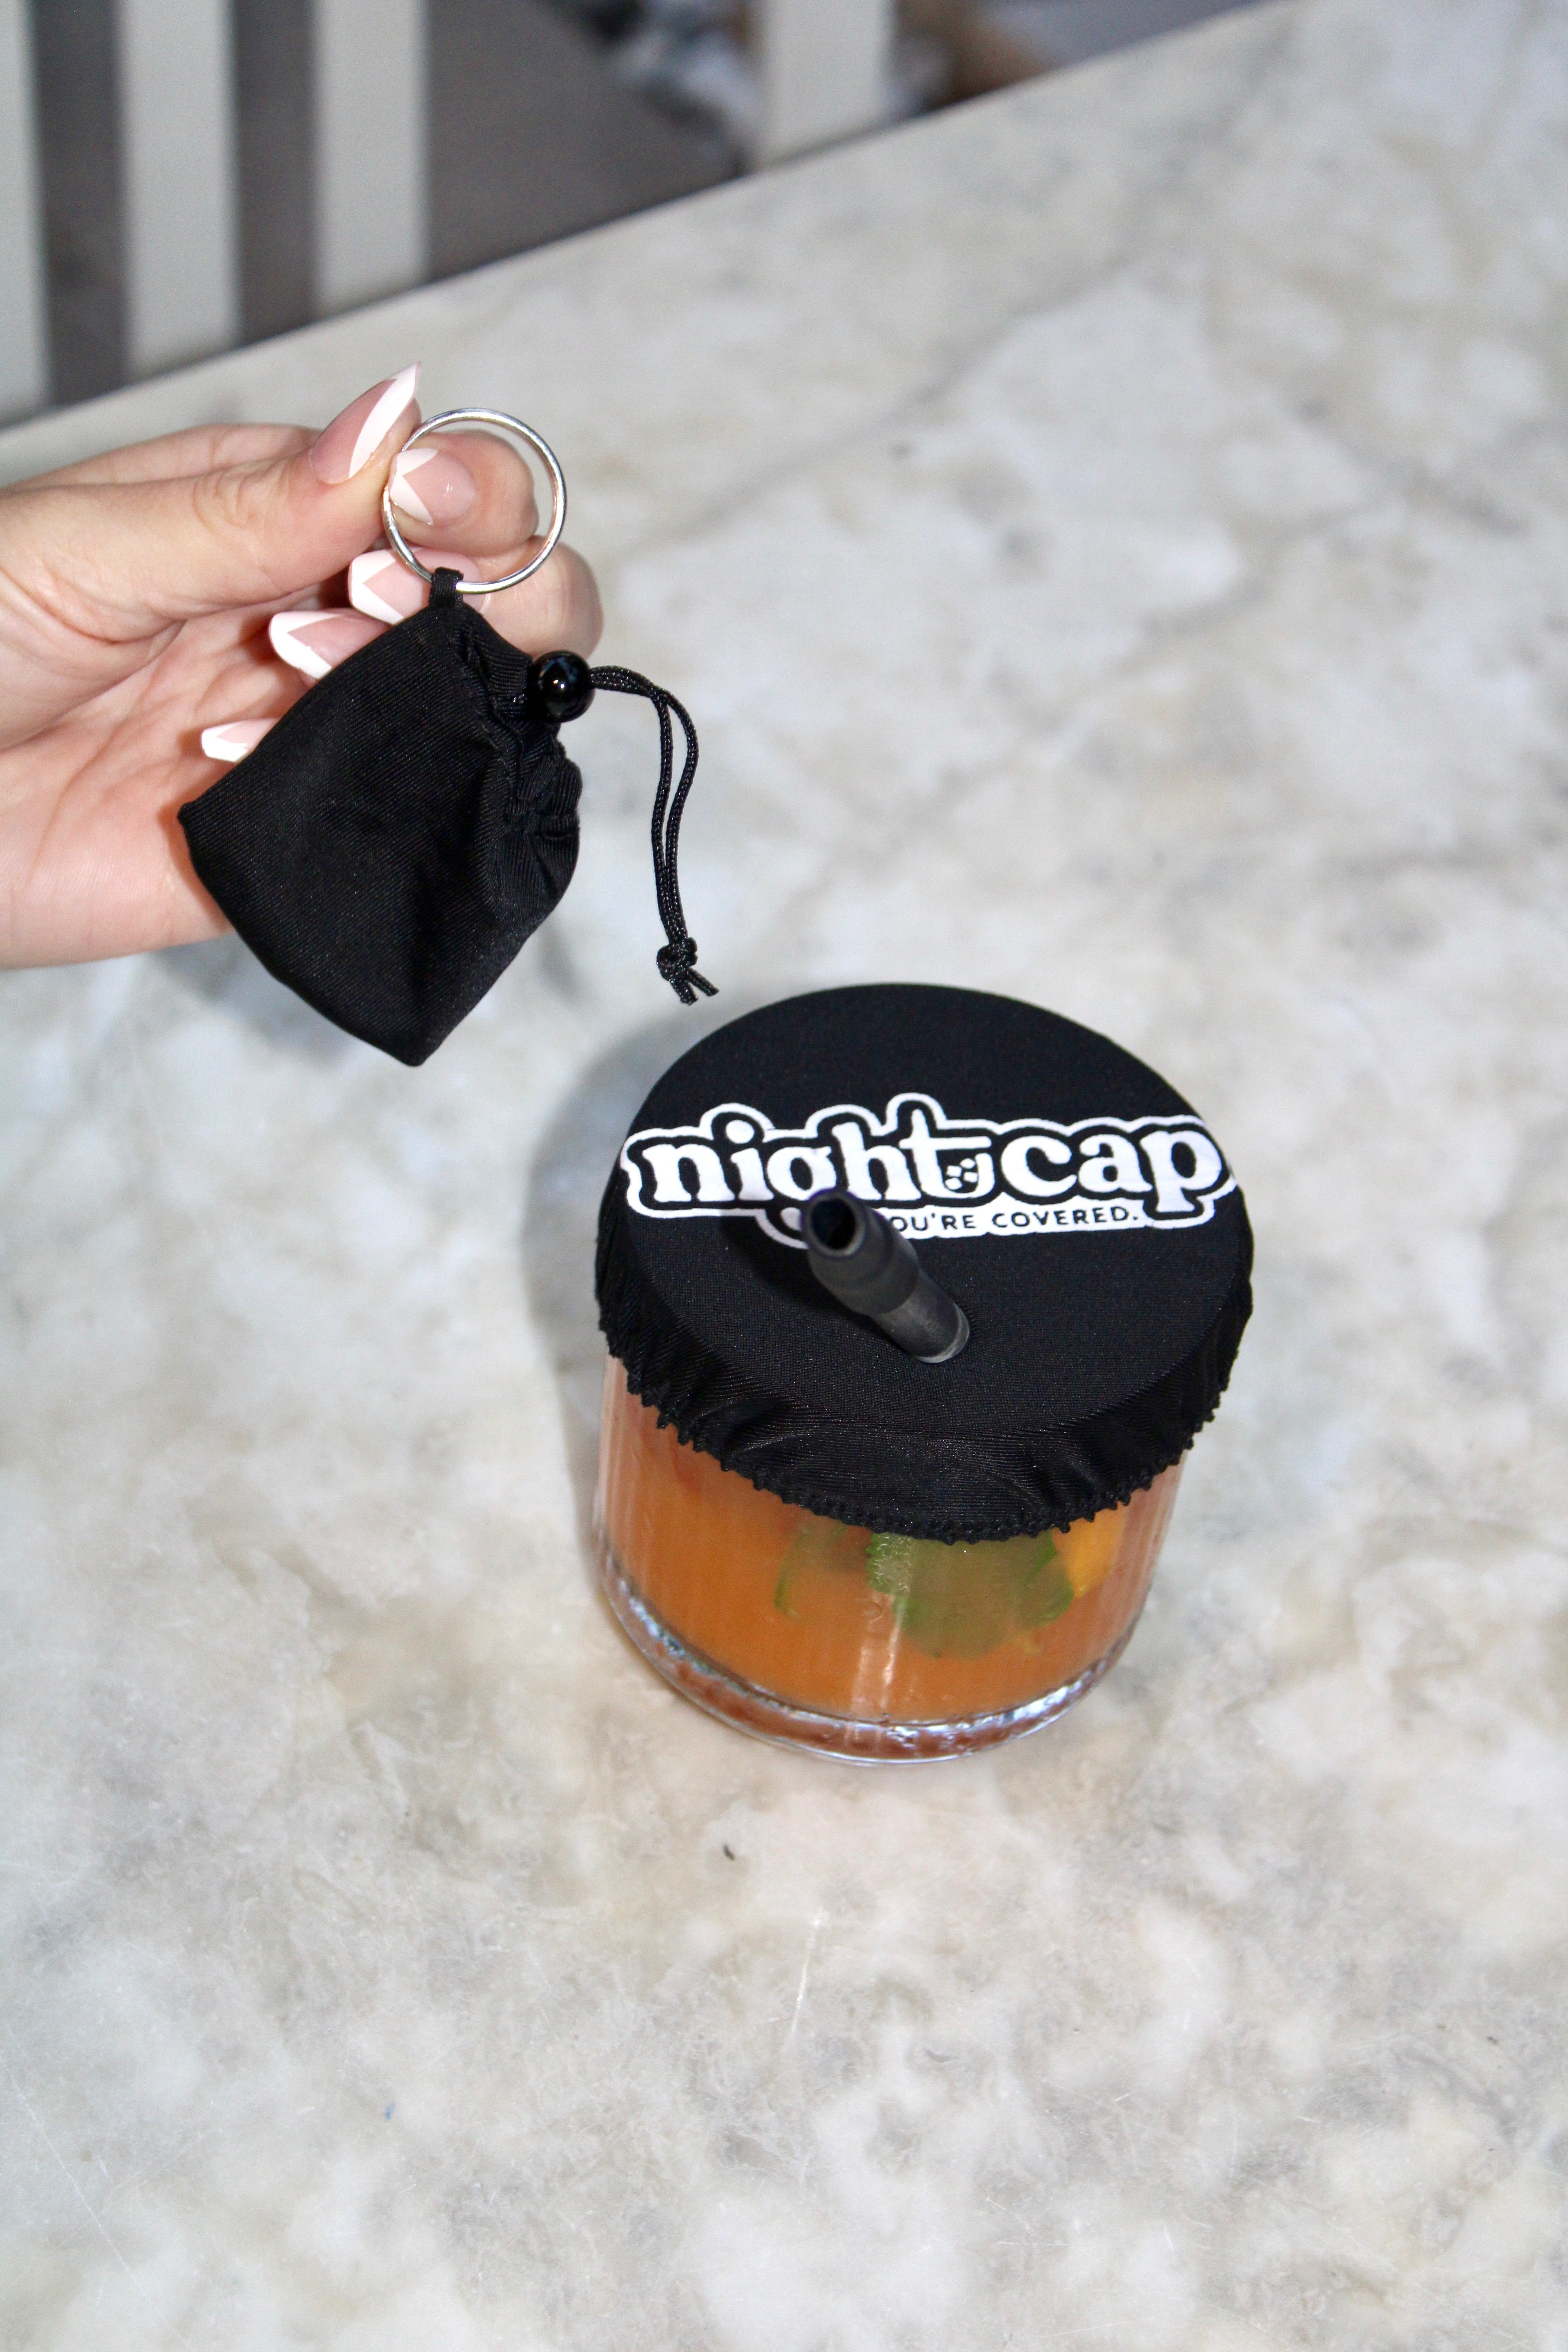 The Original Nightcap Drink Cover Scrunchie, 2 Pack – As Seen On Shark Tank  And TikTok - Reusable - Wear On Wrist Or In Hair, Prevent Drink Spiking 